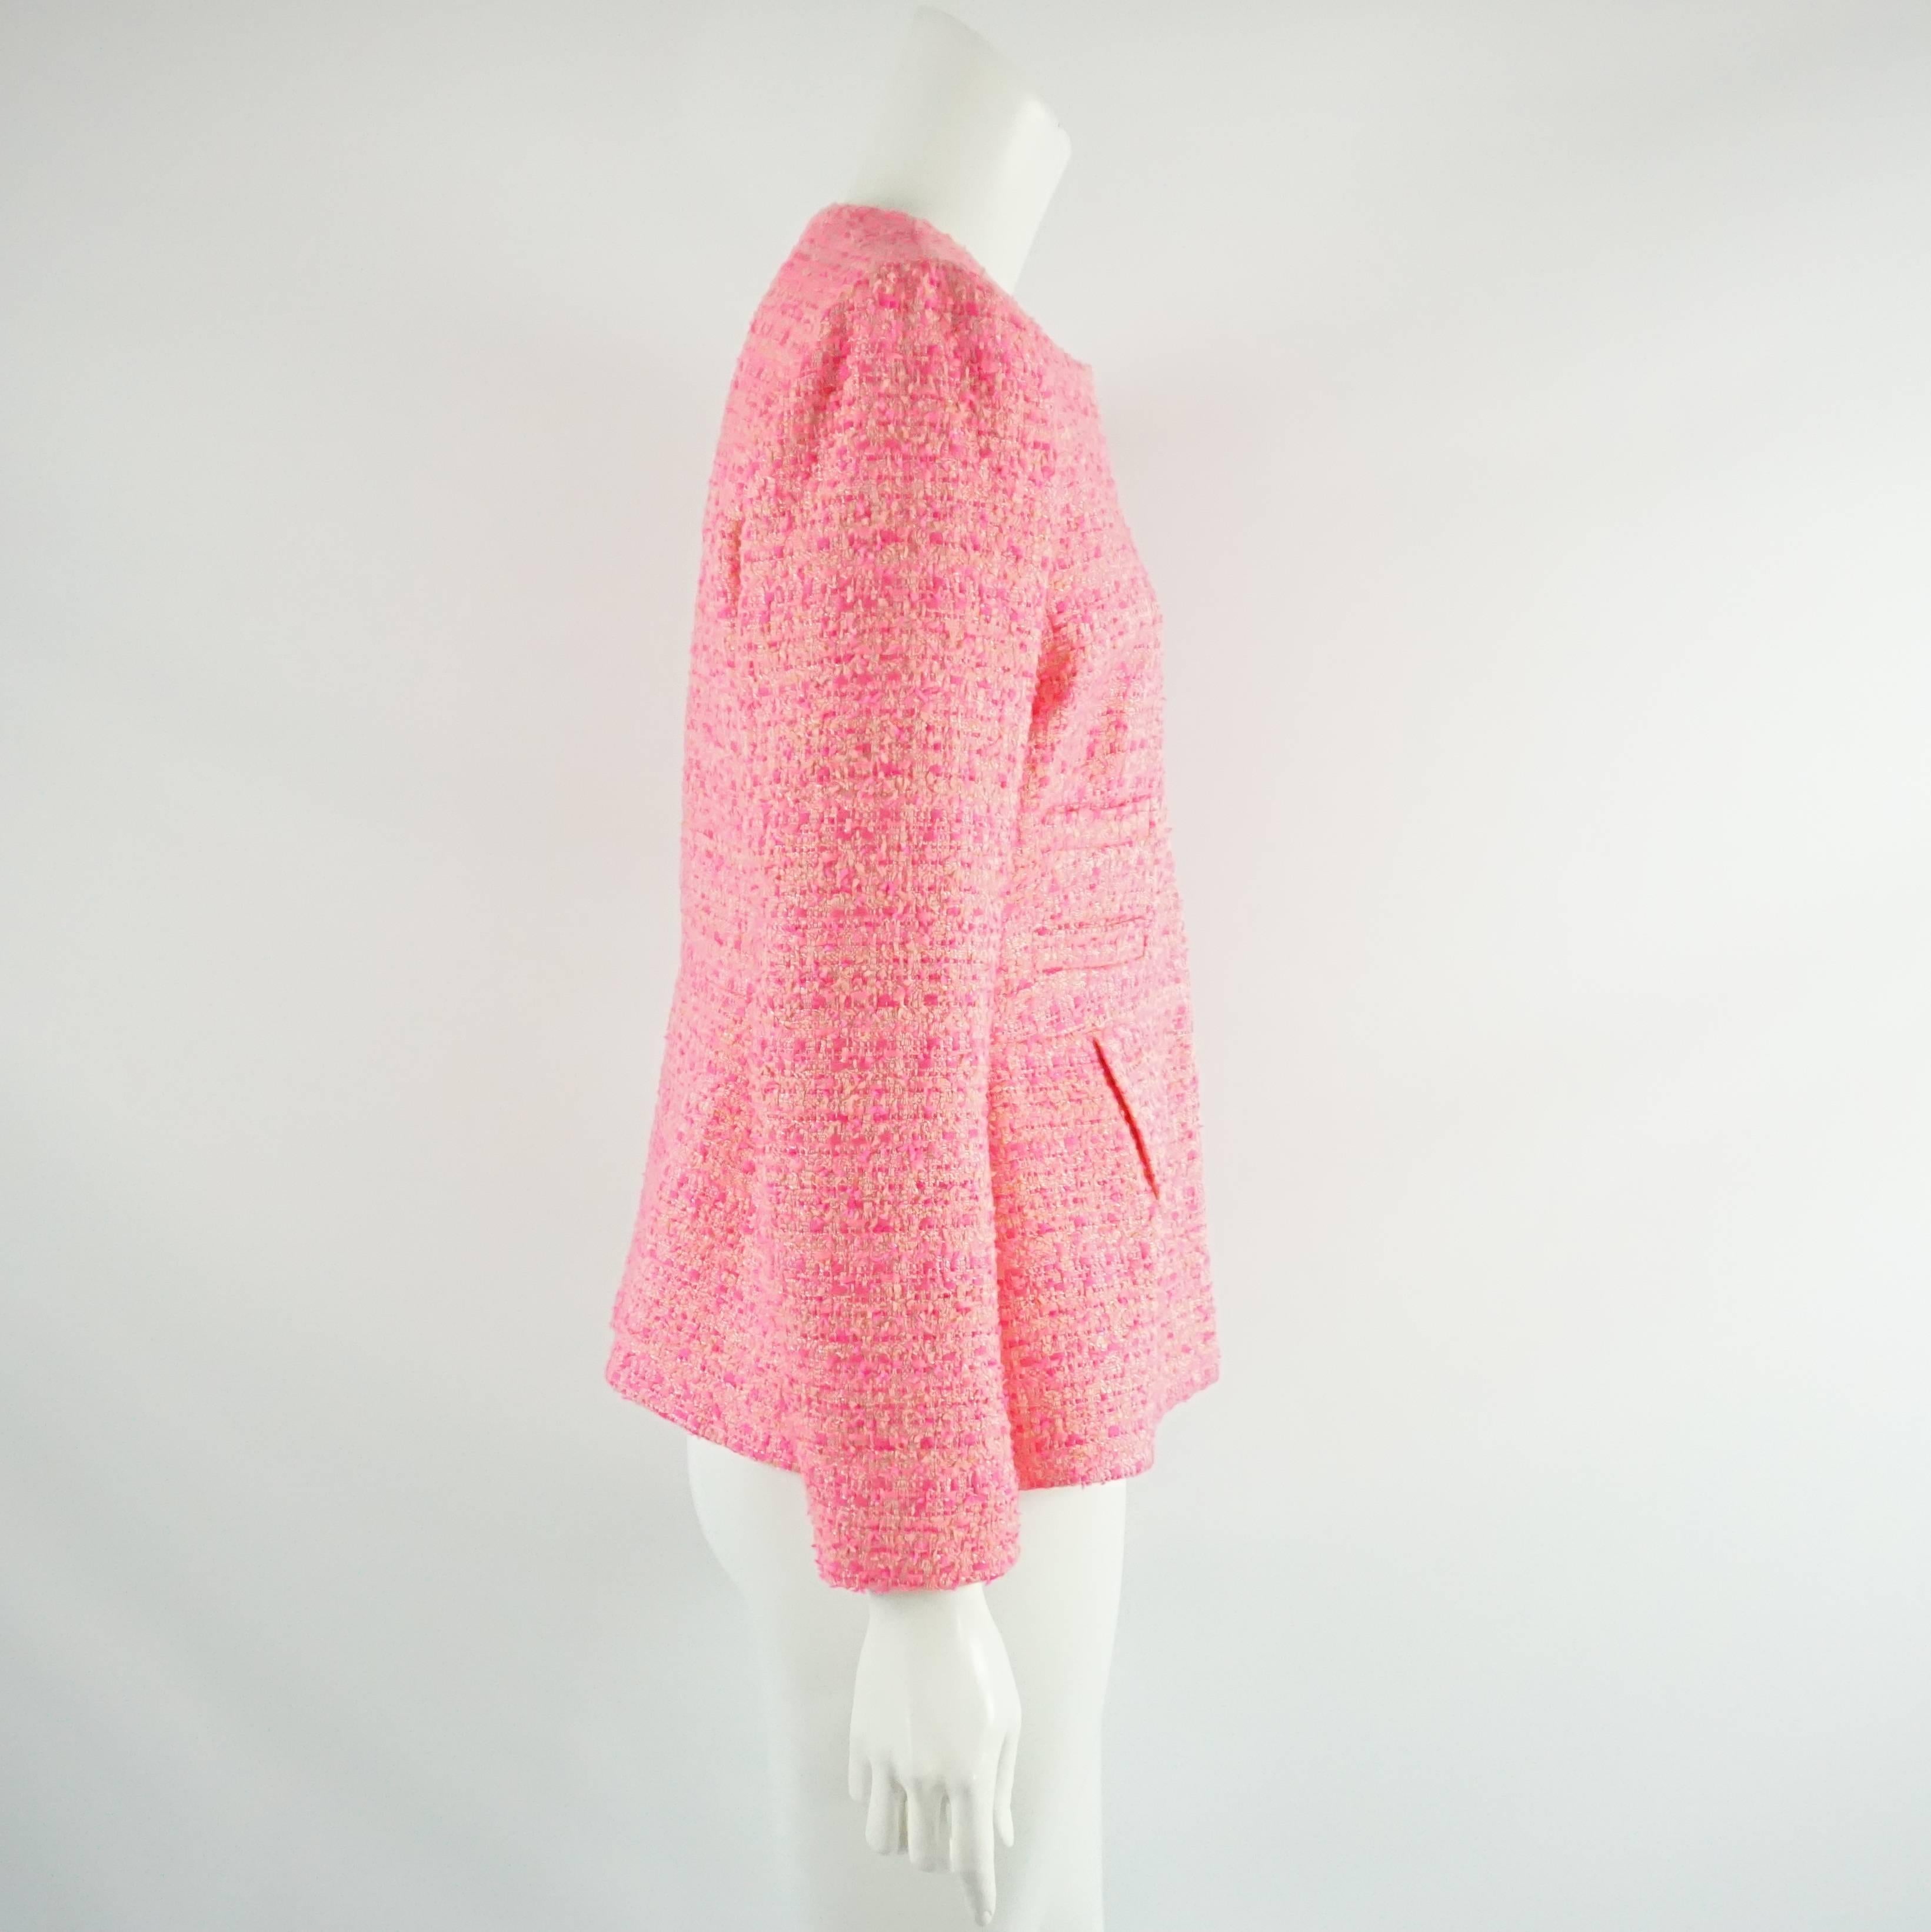 This Giambattista Valli bright pink jacket has differing hues of peach and pink and is made of a synthetic blend. The jacket has a round neck, slight peplum, light shoulder pads, 4 faux pockets in the front, and snap buttons. It is in excellent